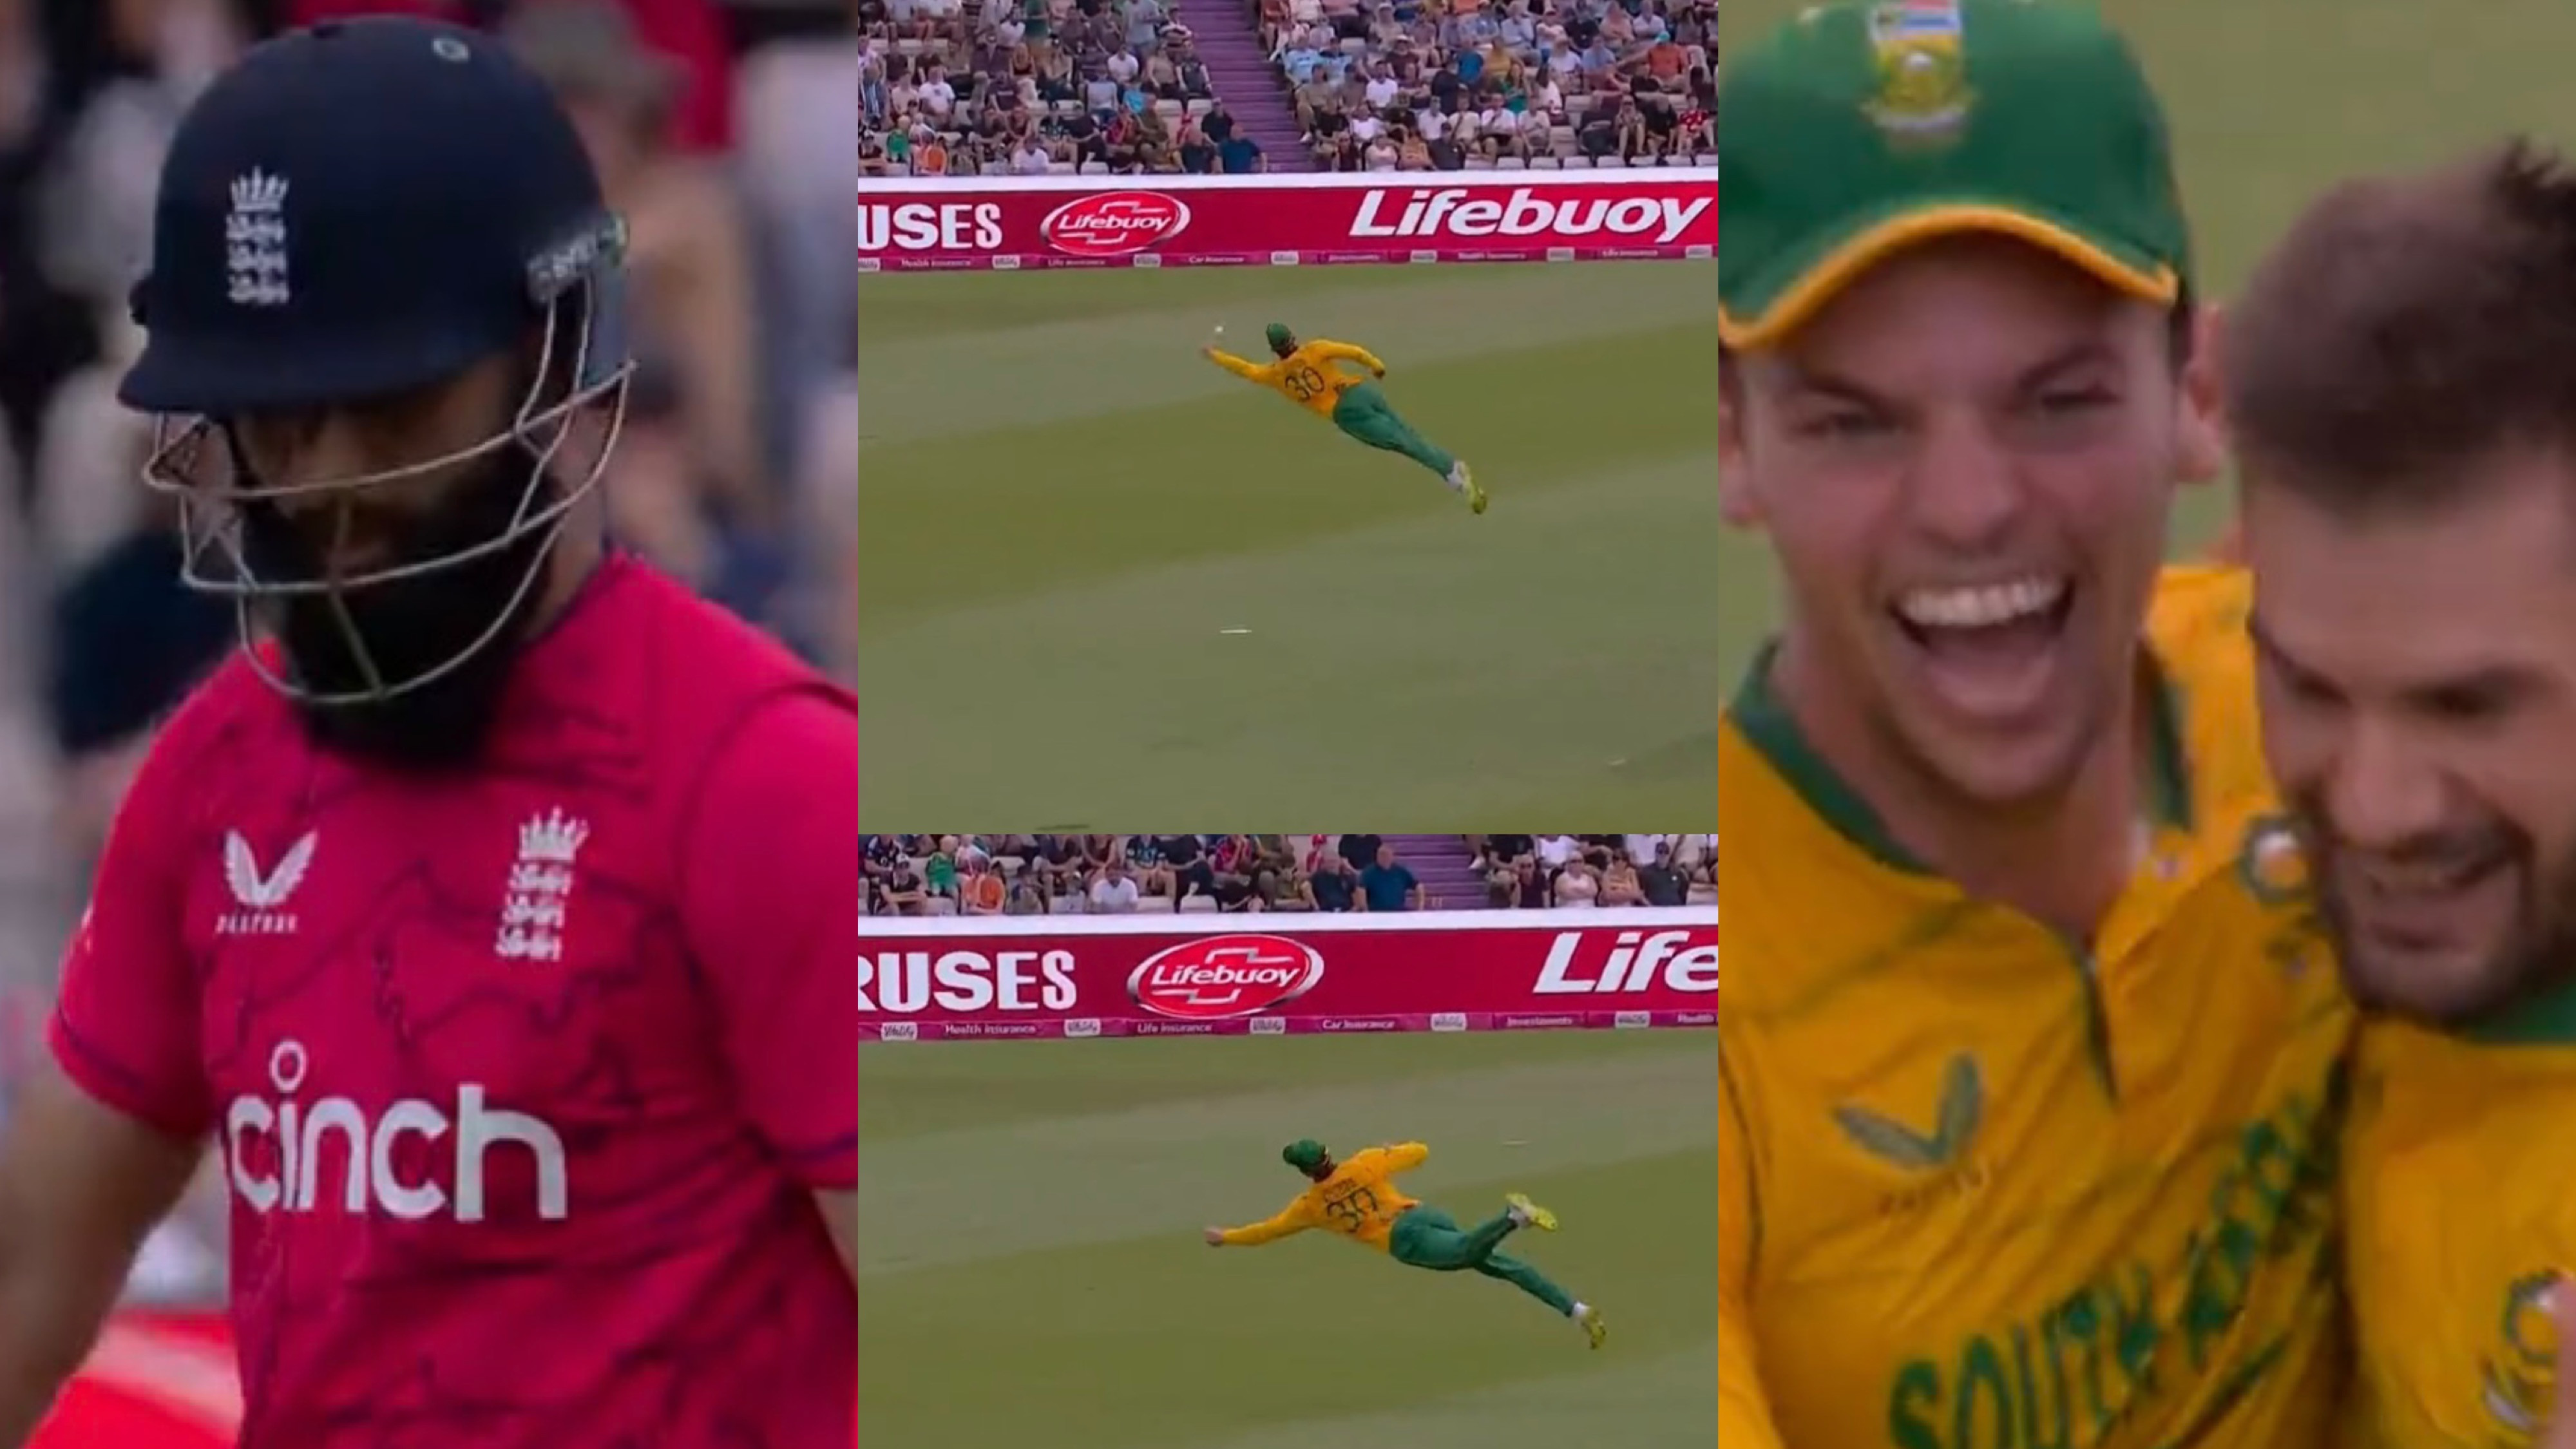 ENG v SA 2022: WATCH - Tristan Stubbs plucks sensational one-handed catch to dismiss Moeen Ali